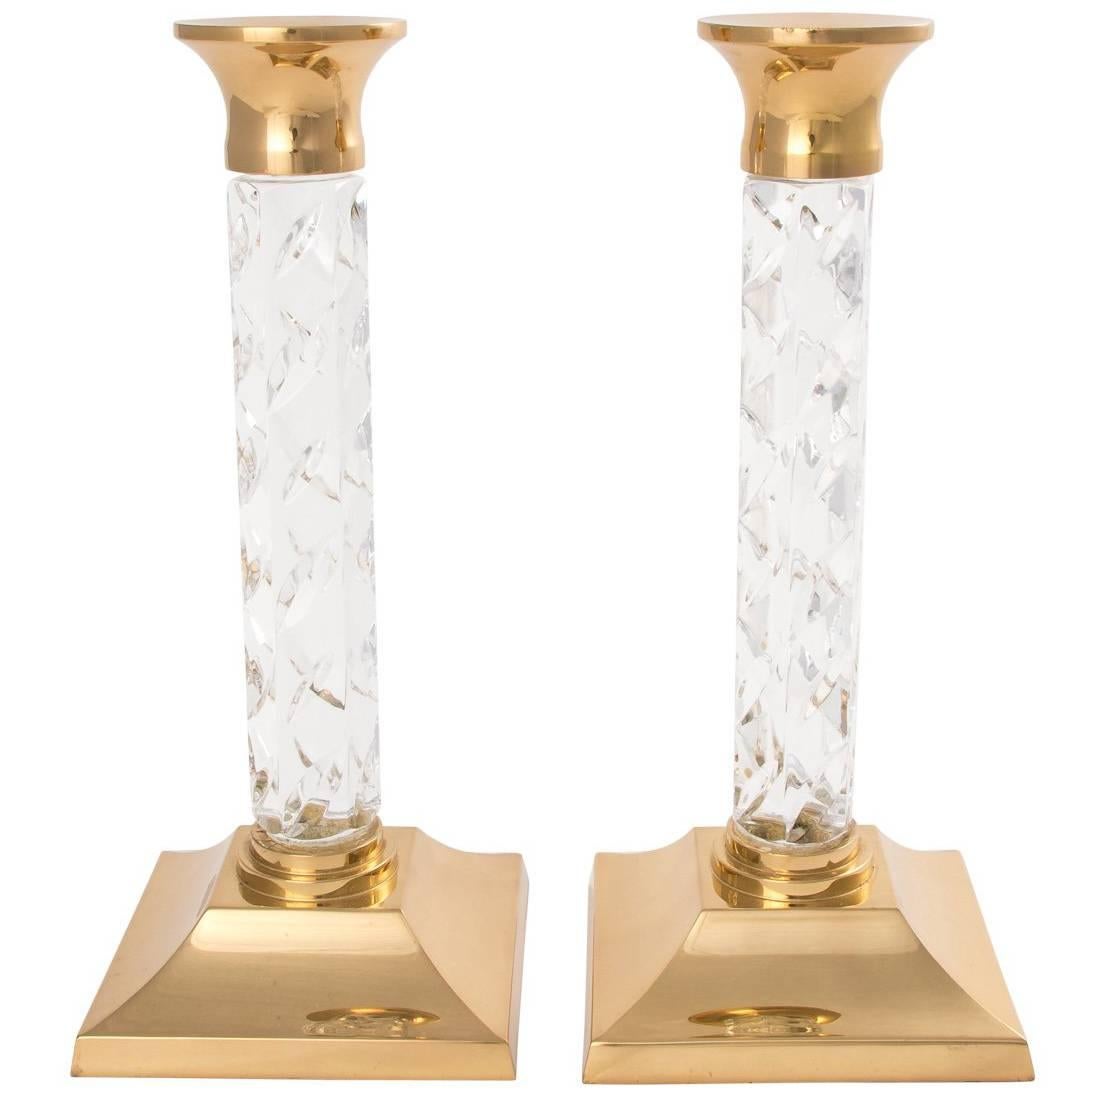 Waterford Candlesticks